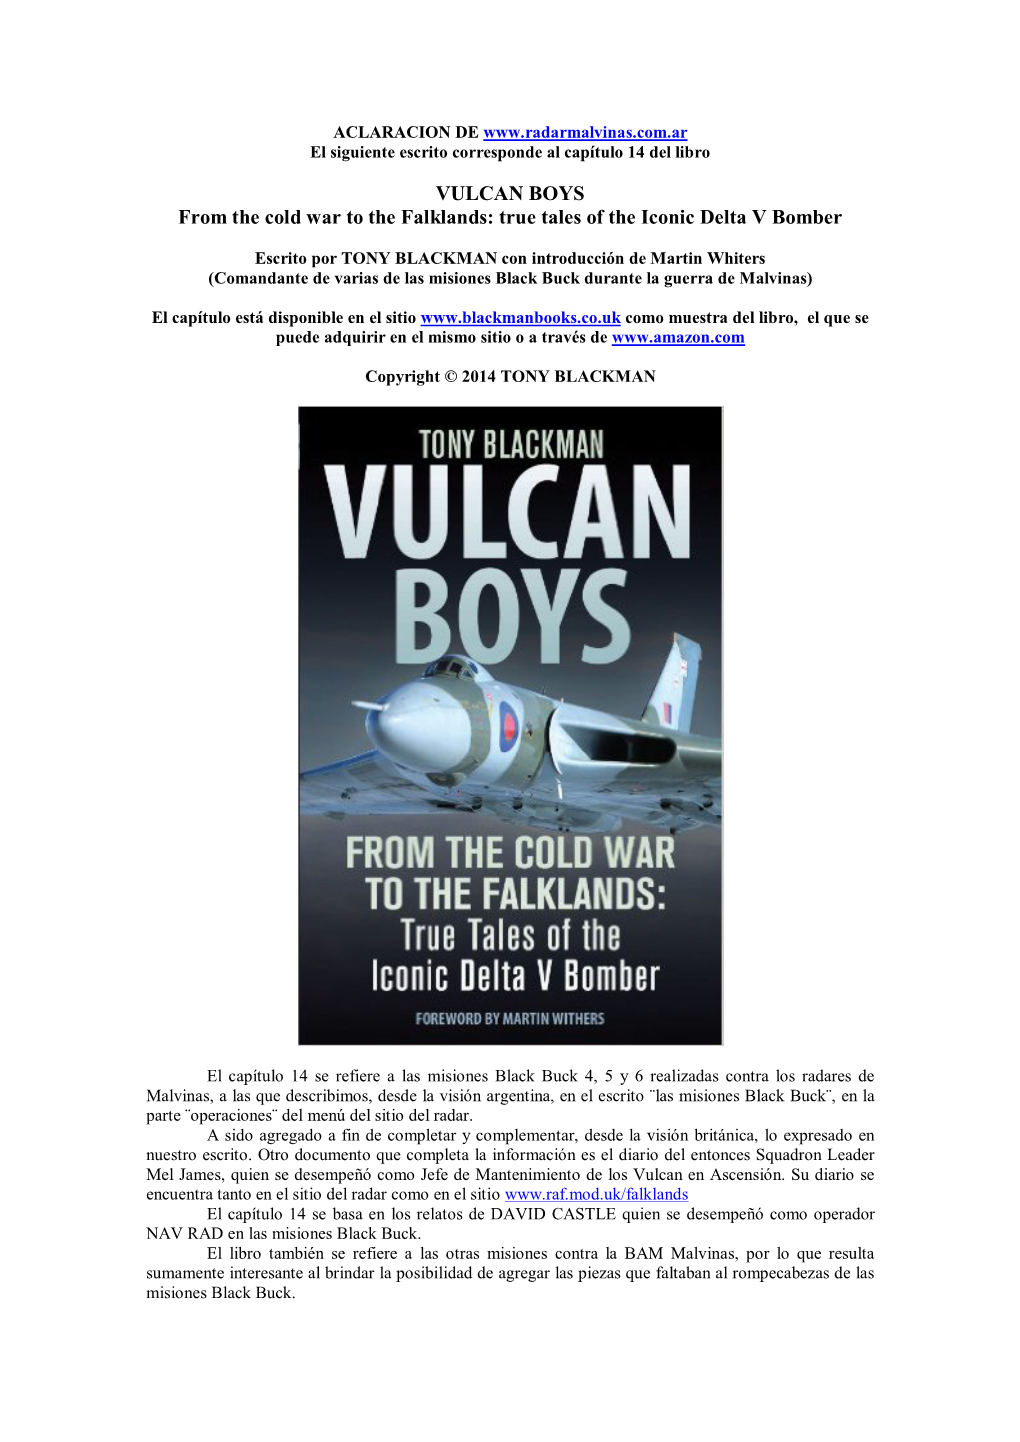 VULCAN BOYS from the Cold War to the Falklands: True Tales of the Iconic Delta V Bomber